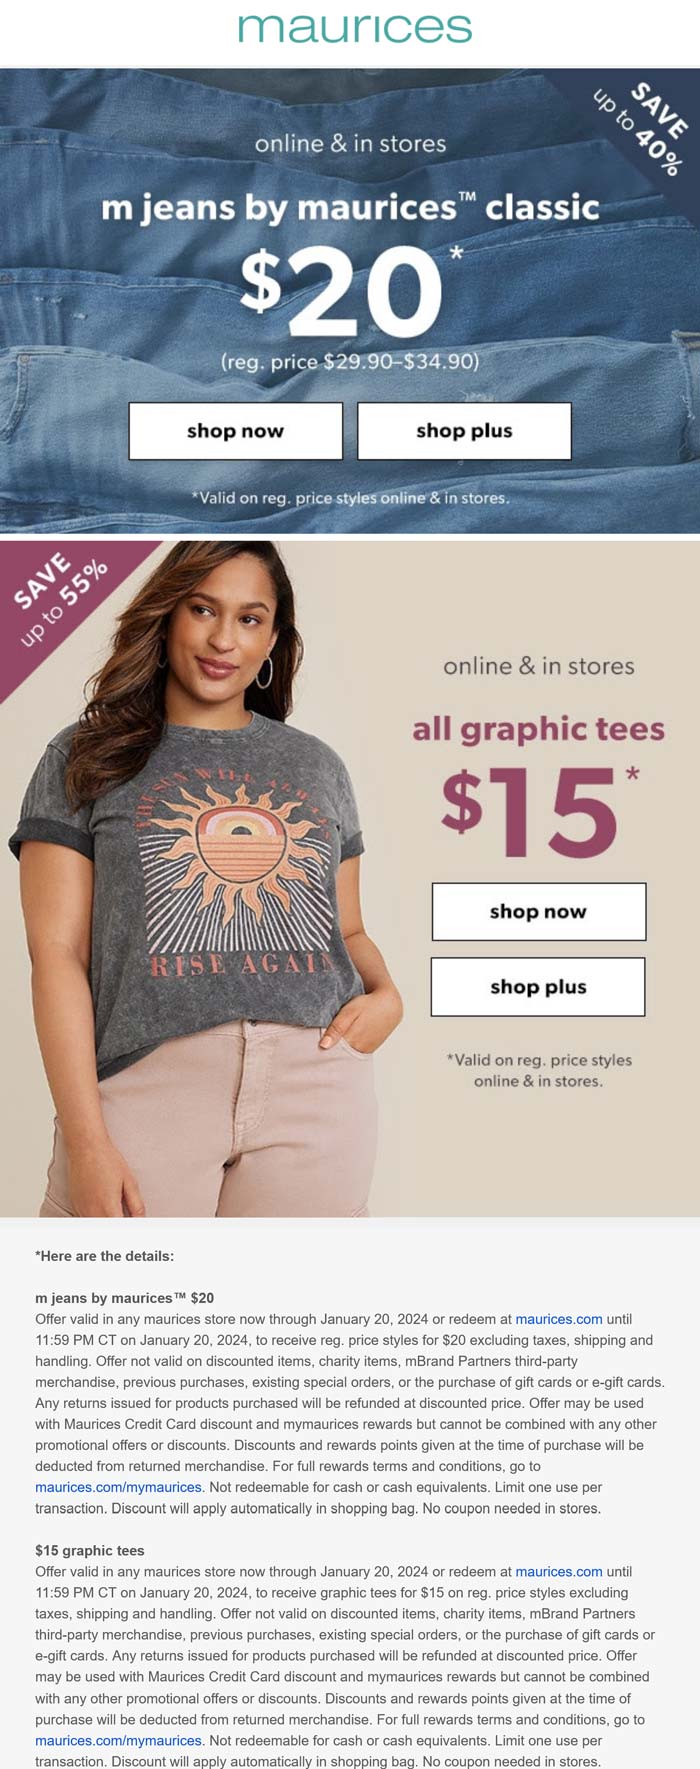 Maurices stores Coupon  $20 m jeans today at Maurices, ditto online #maurices 